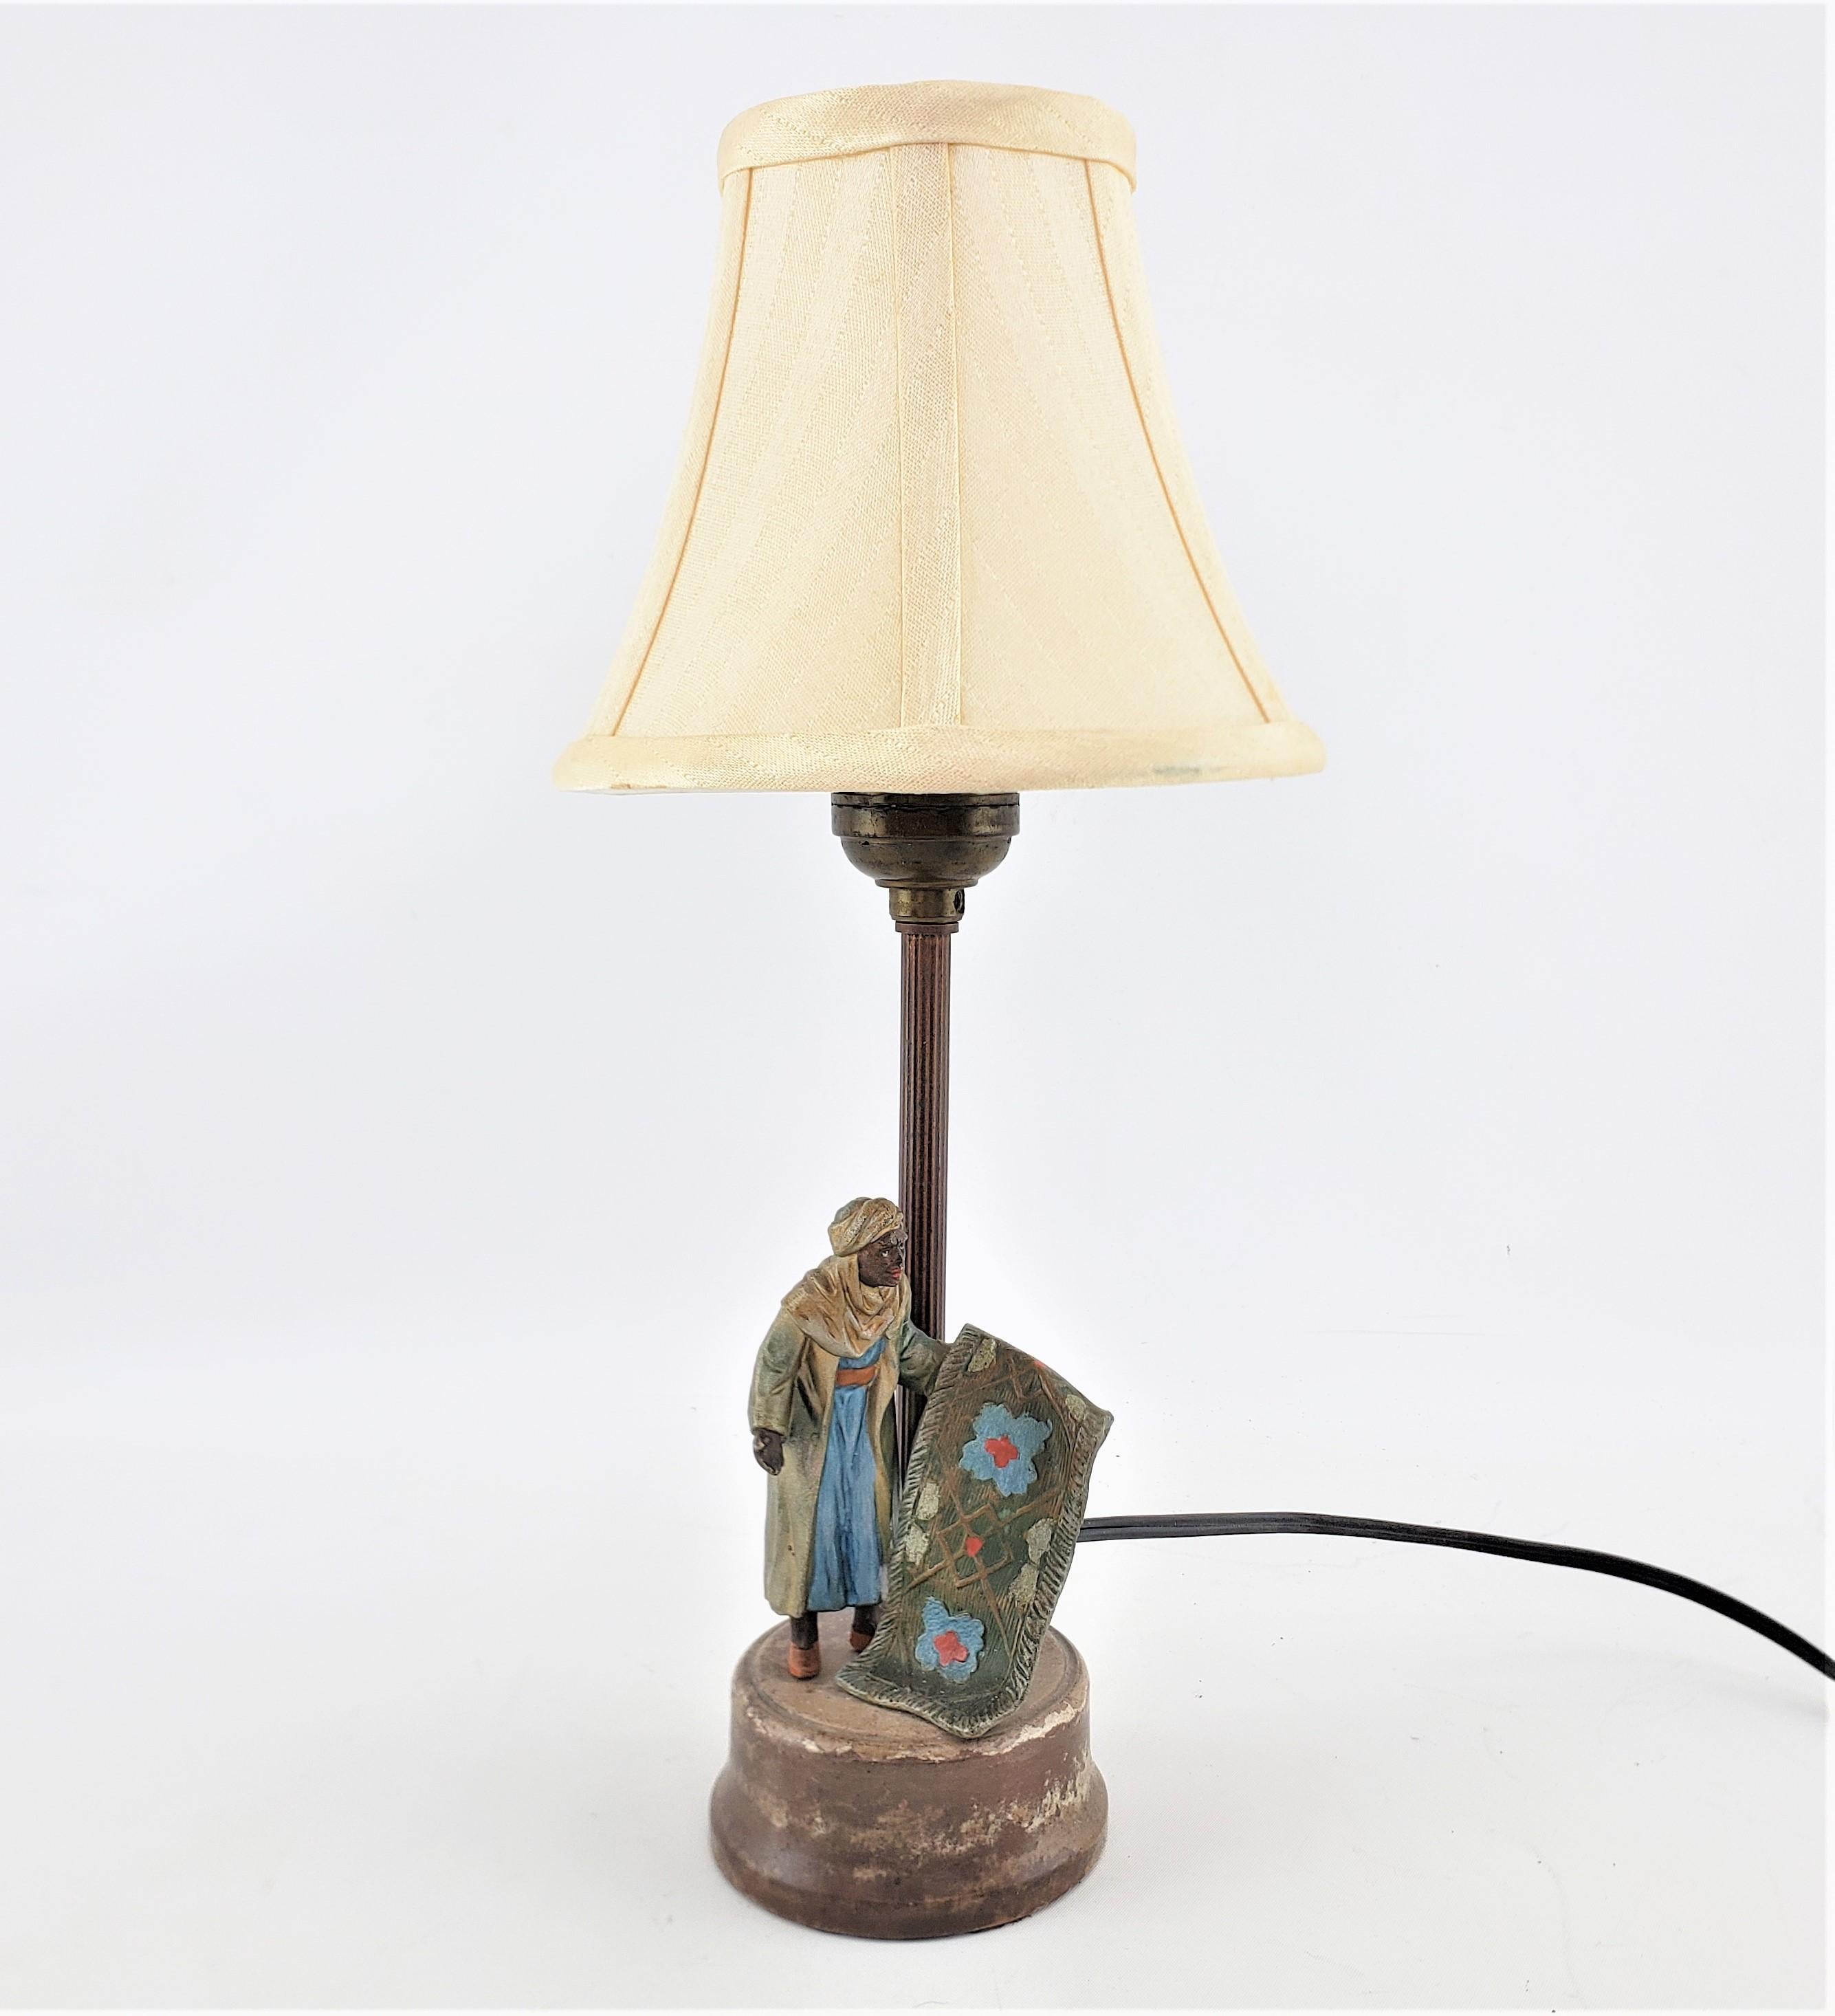 This small antique figural desk or table lamp is unsigned, but presumed to have originated from Austria and dating to approximately 1920 and done in the period Art Deco style. The base of the lamp is done with cast spelter which has been